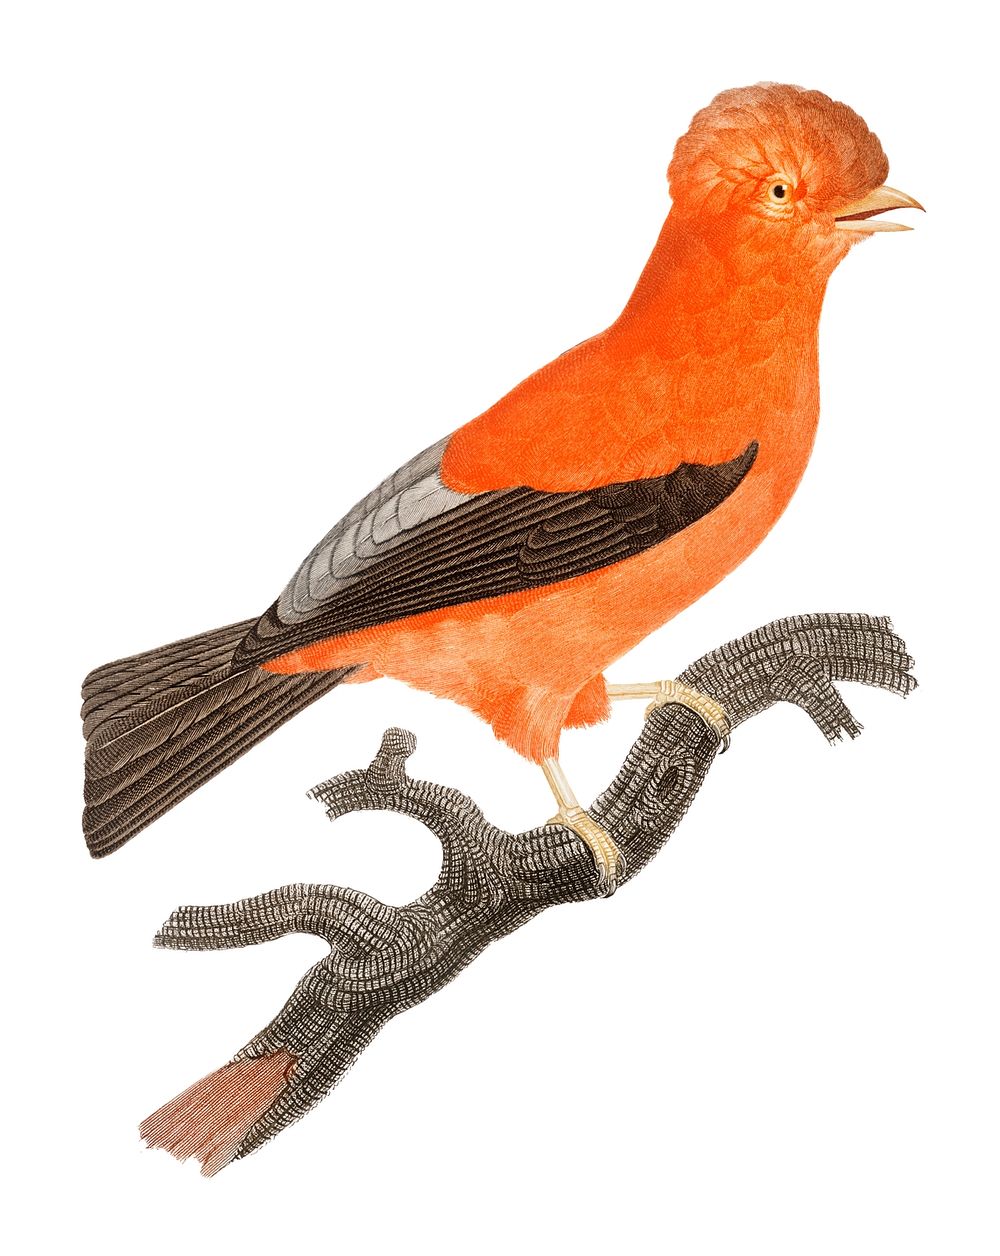 Vintage illustration of Andean cock-of-the-rock